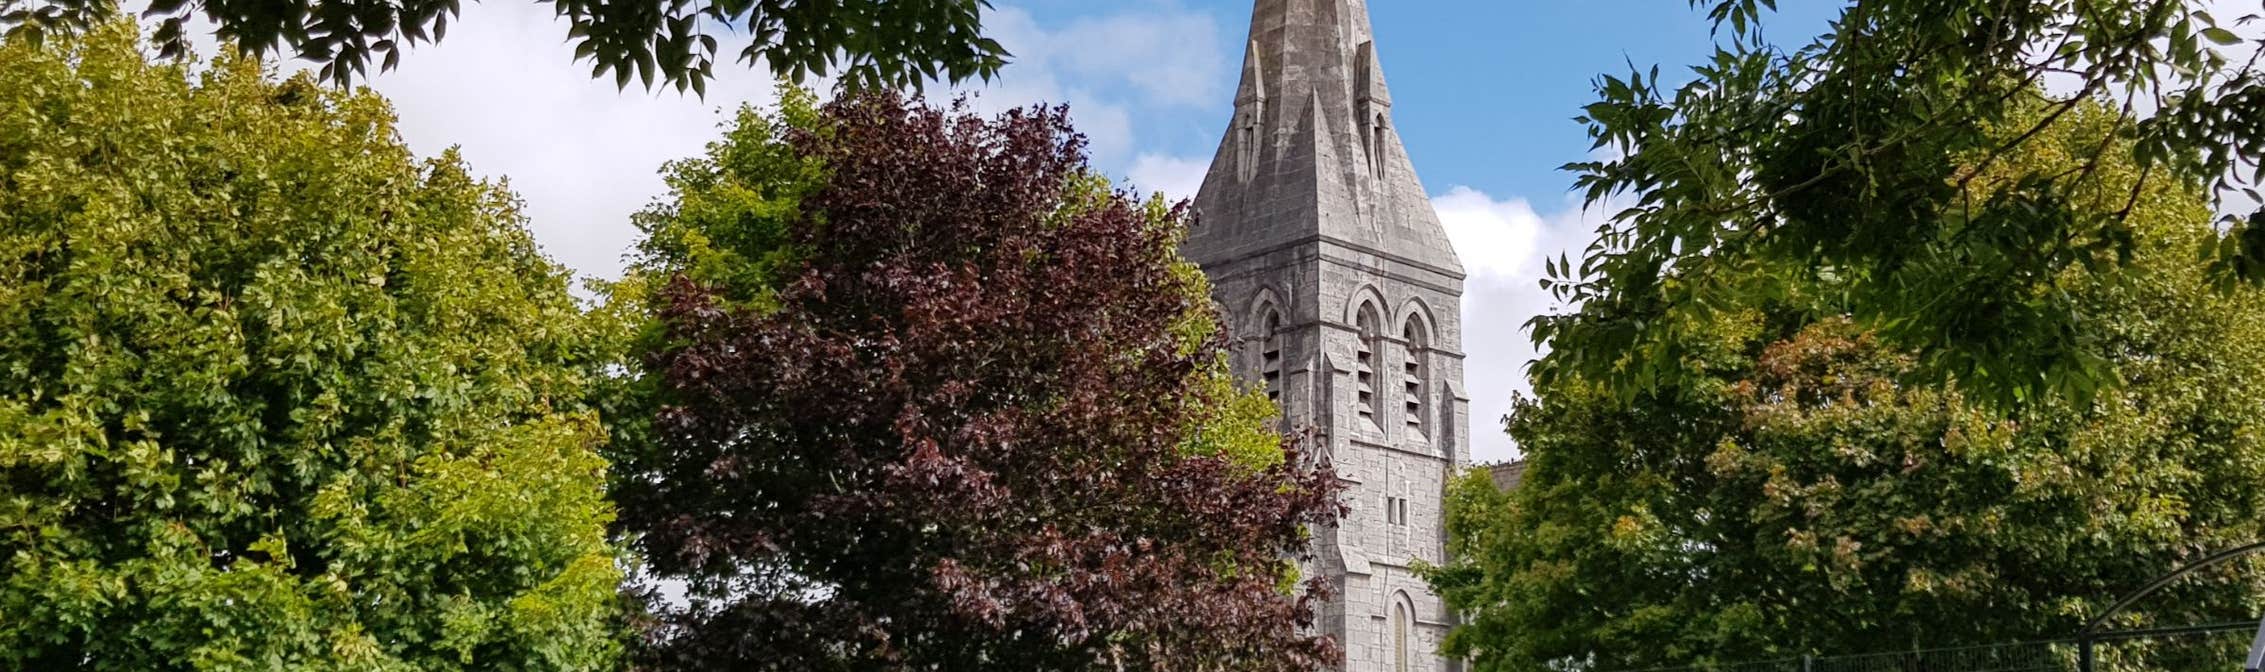 Image of a church in Douglas in County Cork